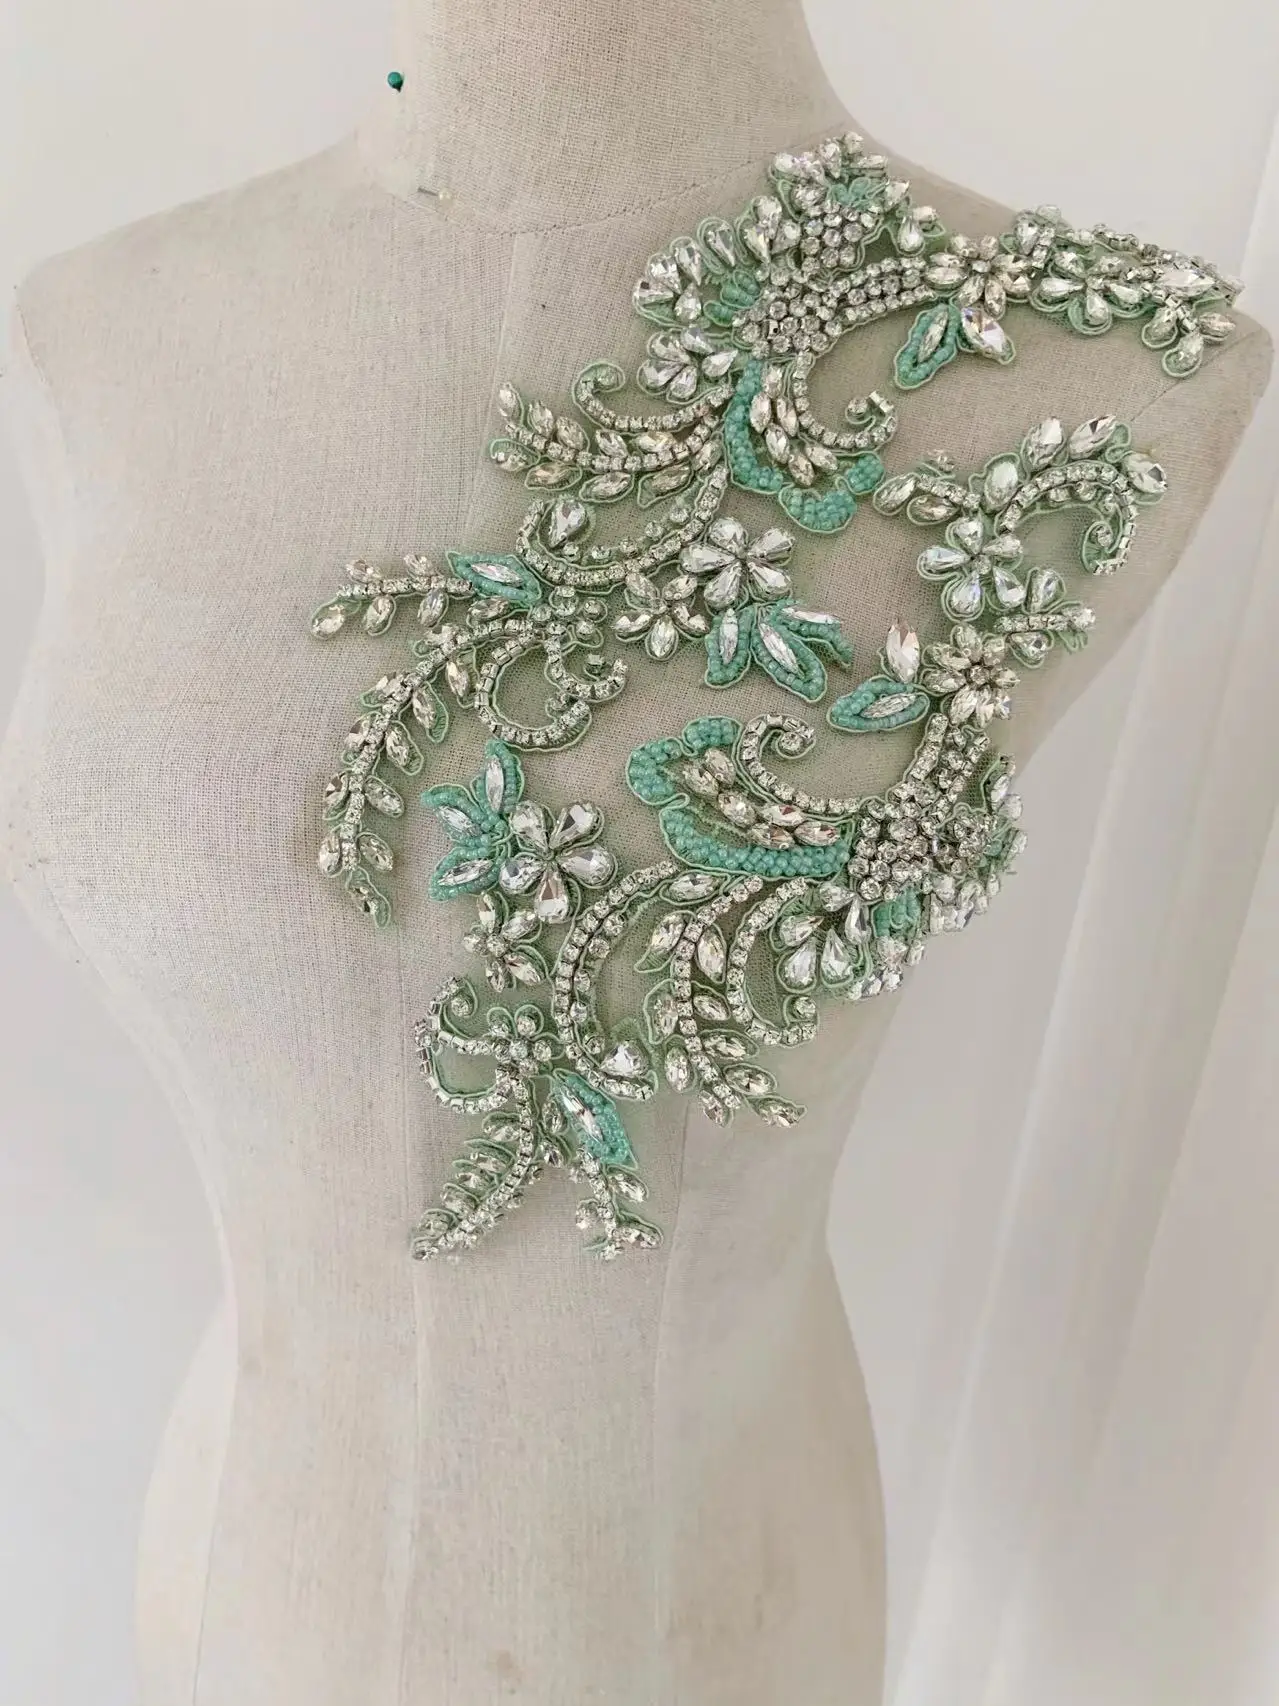 1 Pair Mint Green Elegant Rhinestone Luxurious Beaded Applique Crystal Flowers Bodice Patch for Couture Gown,Wedding Dress Decor